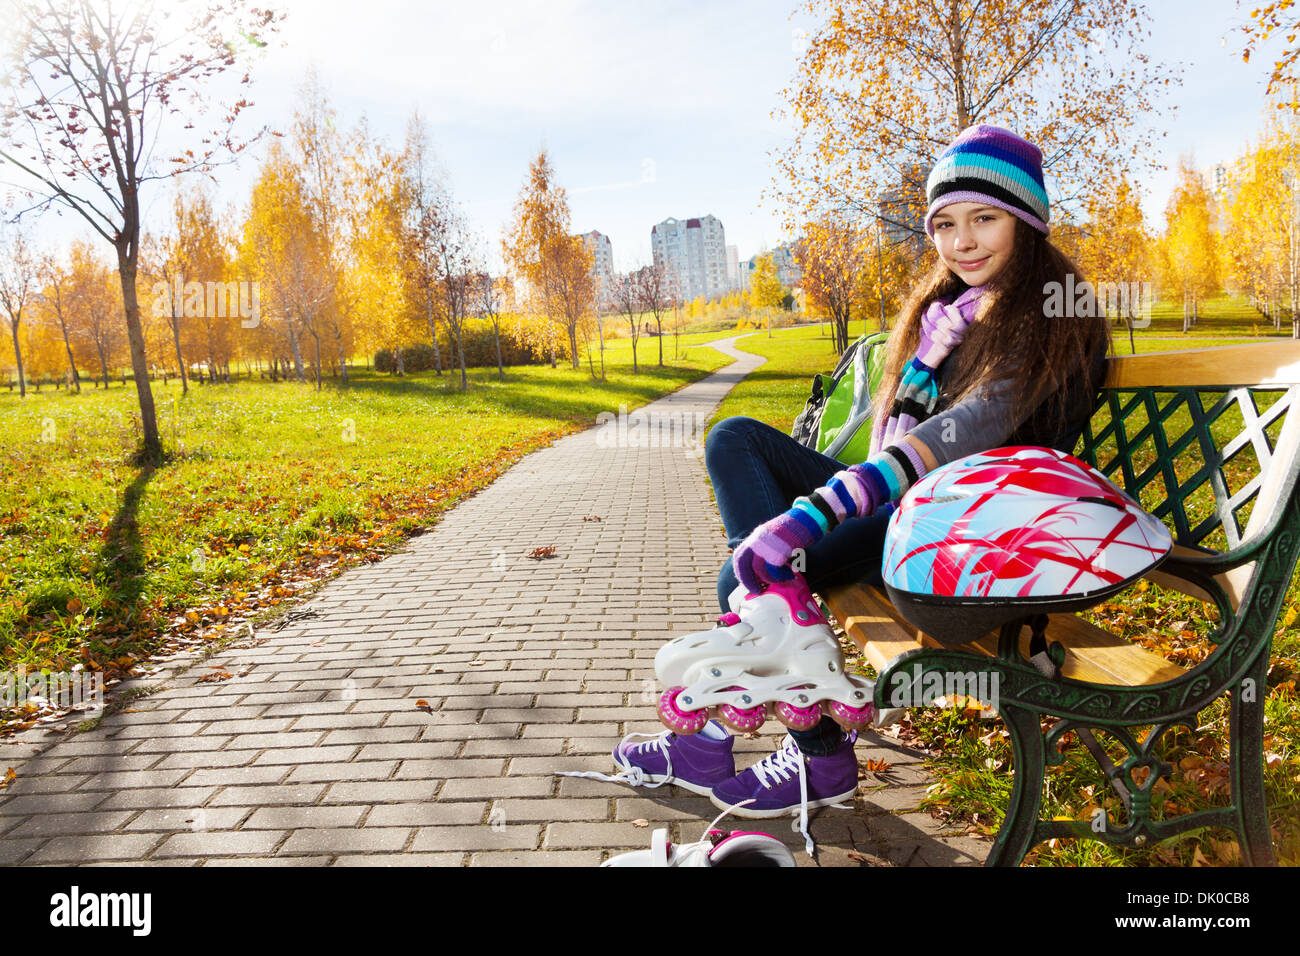 11 years old beautiful girl sitting on the bench in the park putting on roller blades to go skating in the autumn park on sunny day Stock Photo